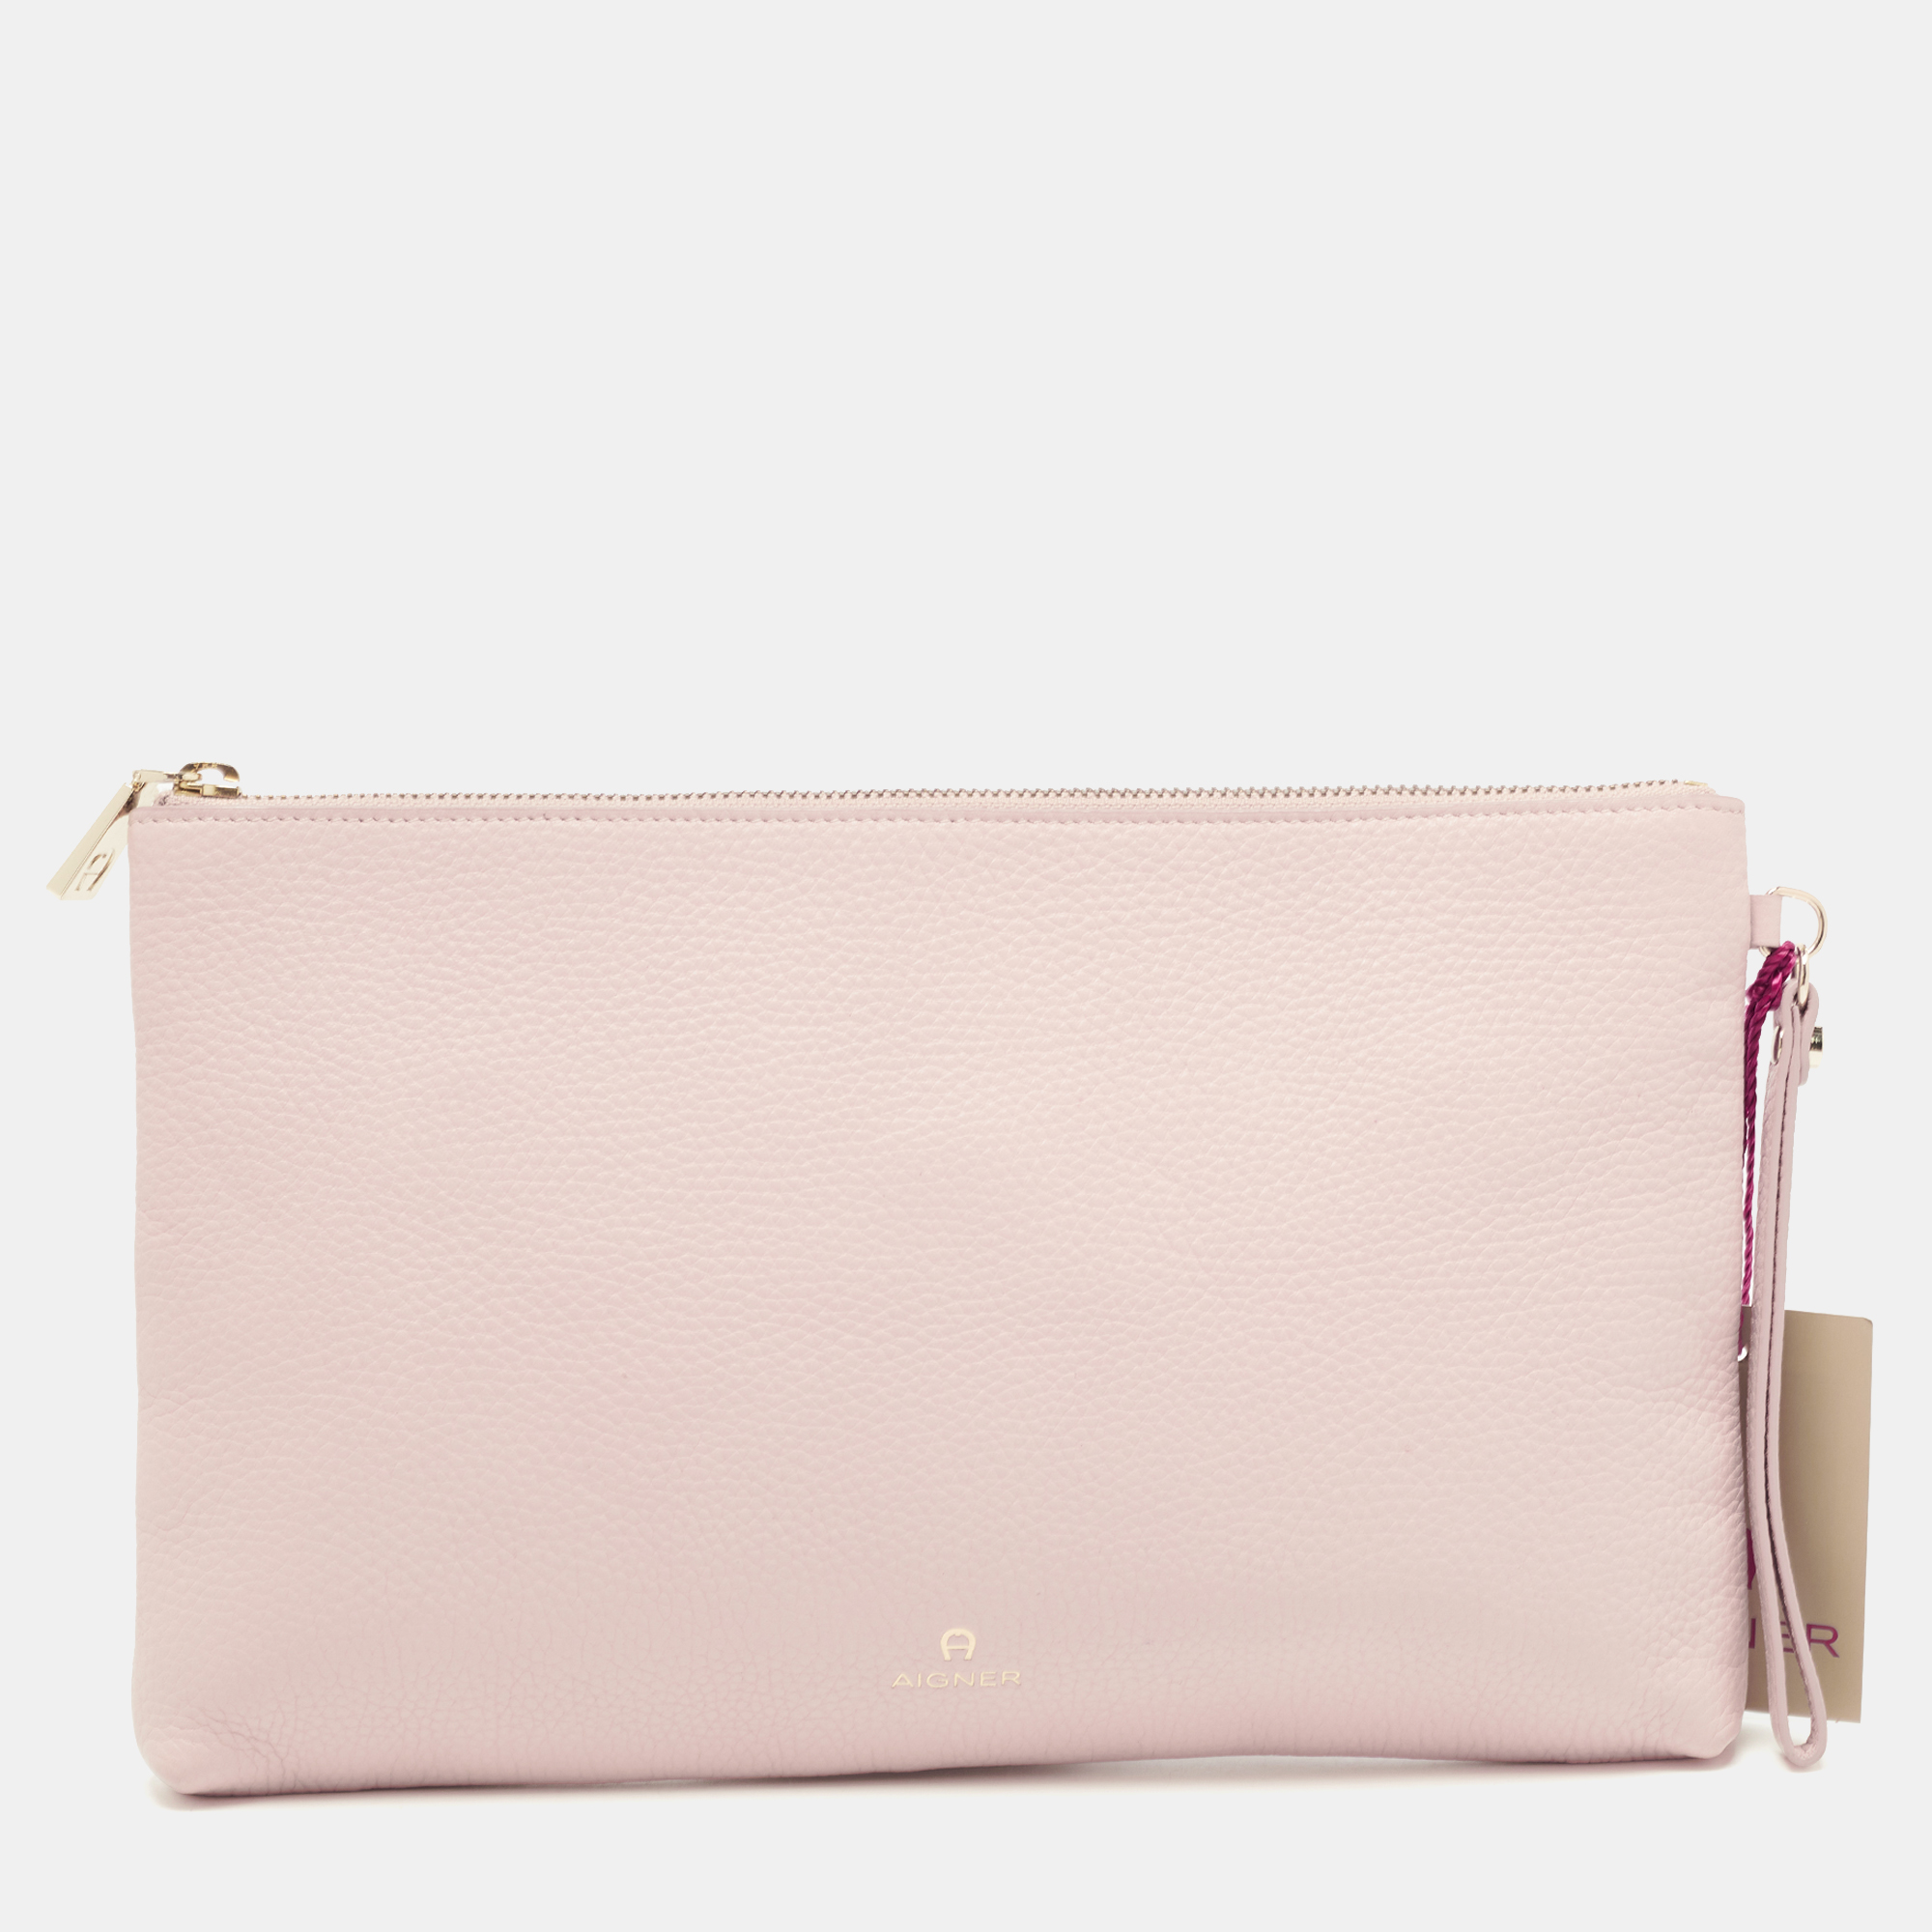 Pre-owned Aigner Light Pink Leather Wristlet Clutch